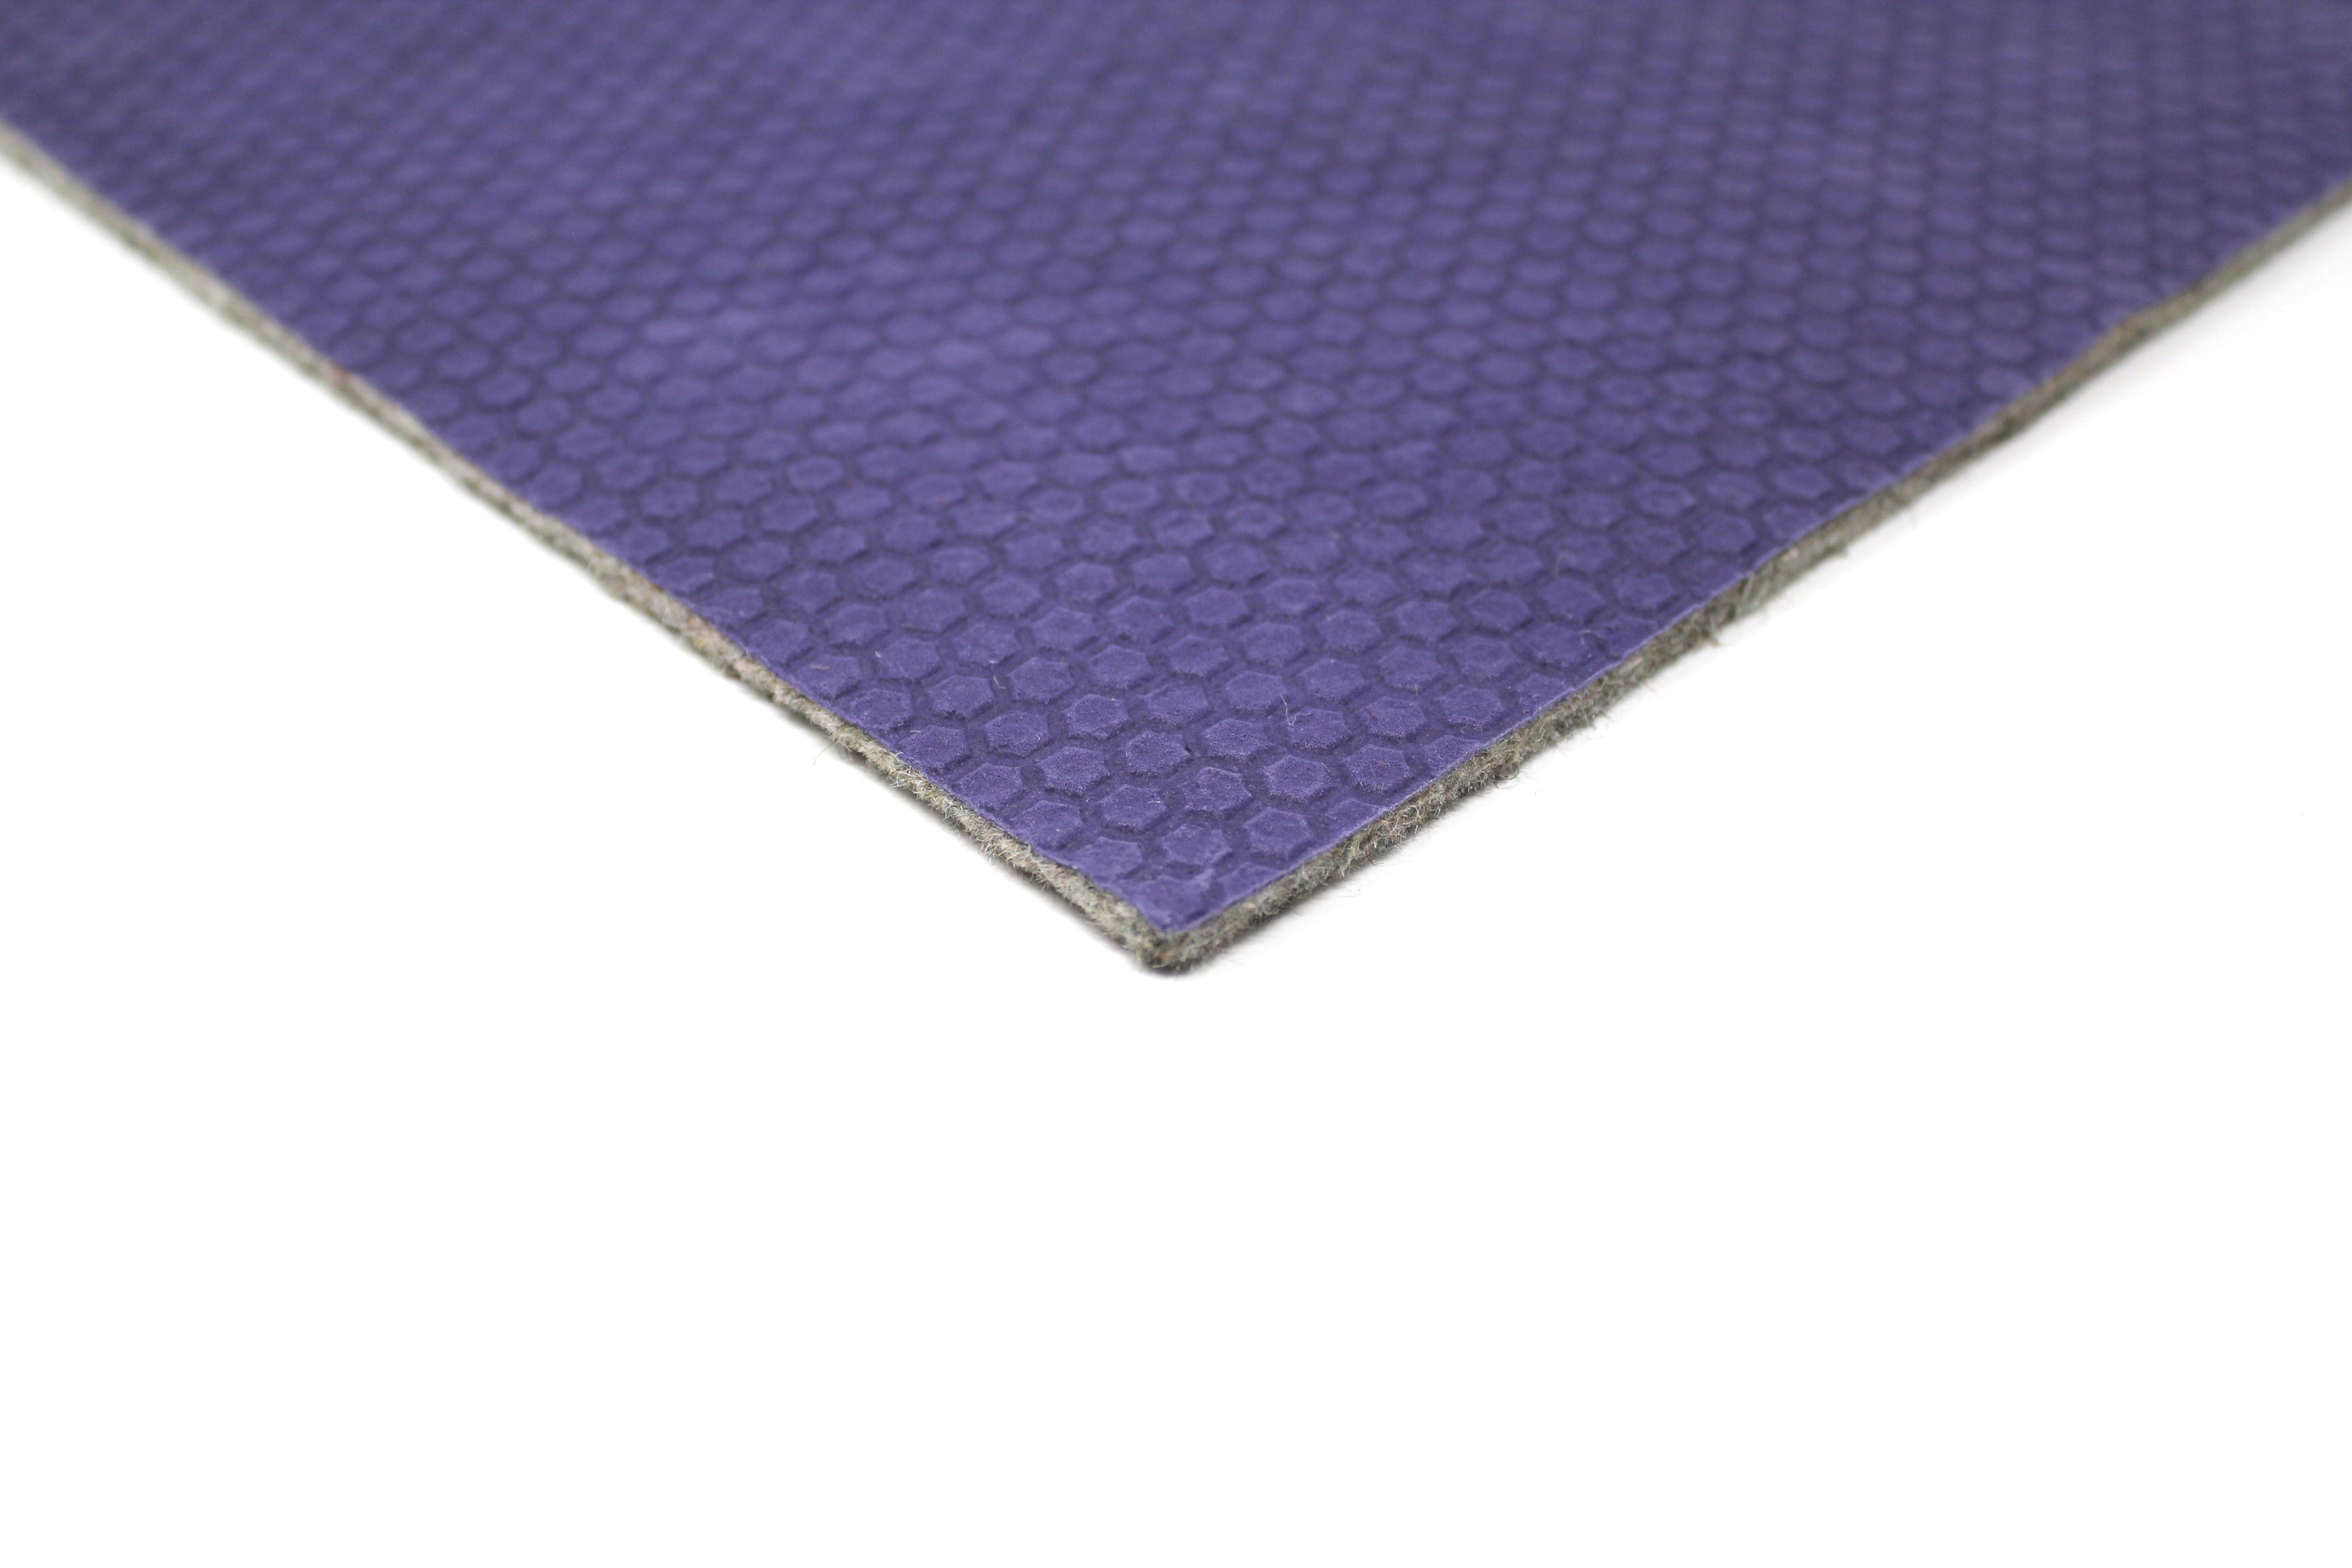 Felt & Natural Rubber Rug Pad for Multi-Surfaces - Modern Rugs